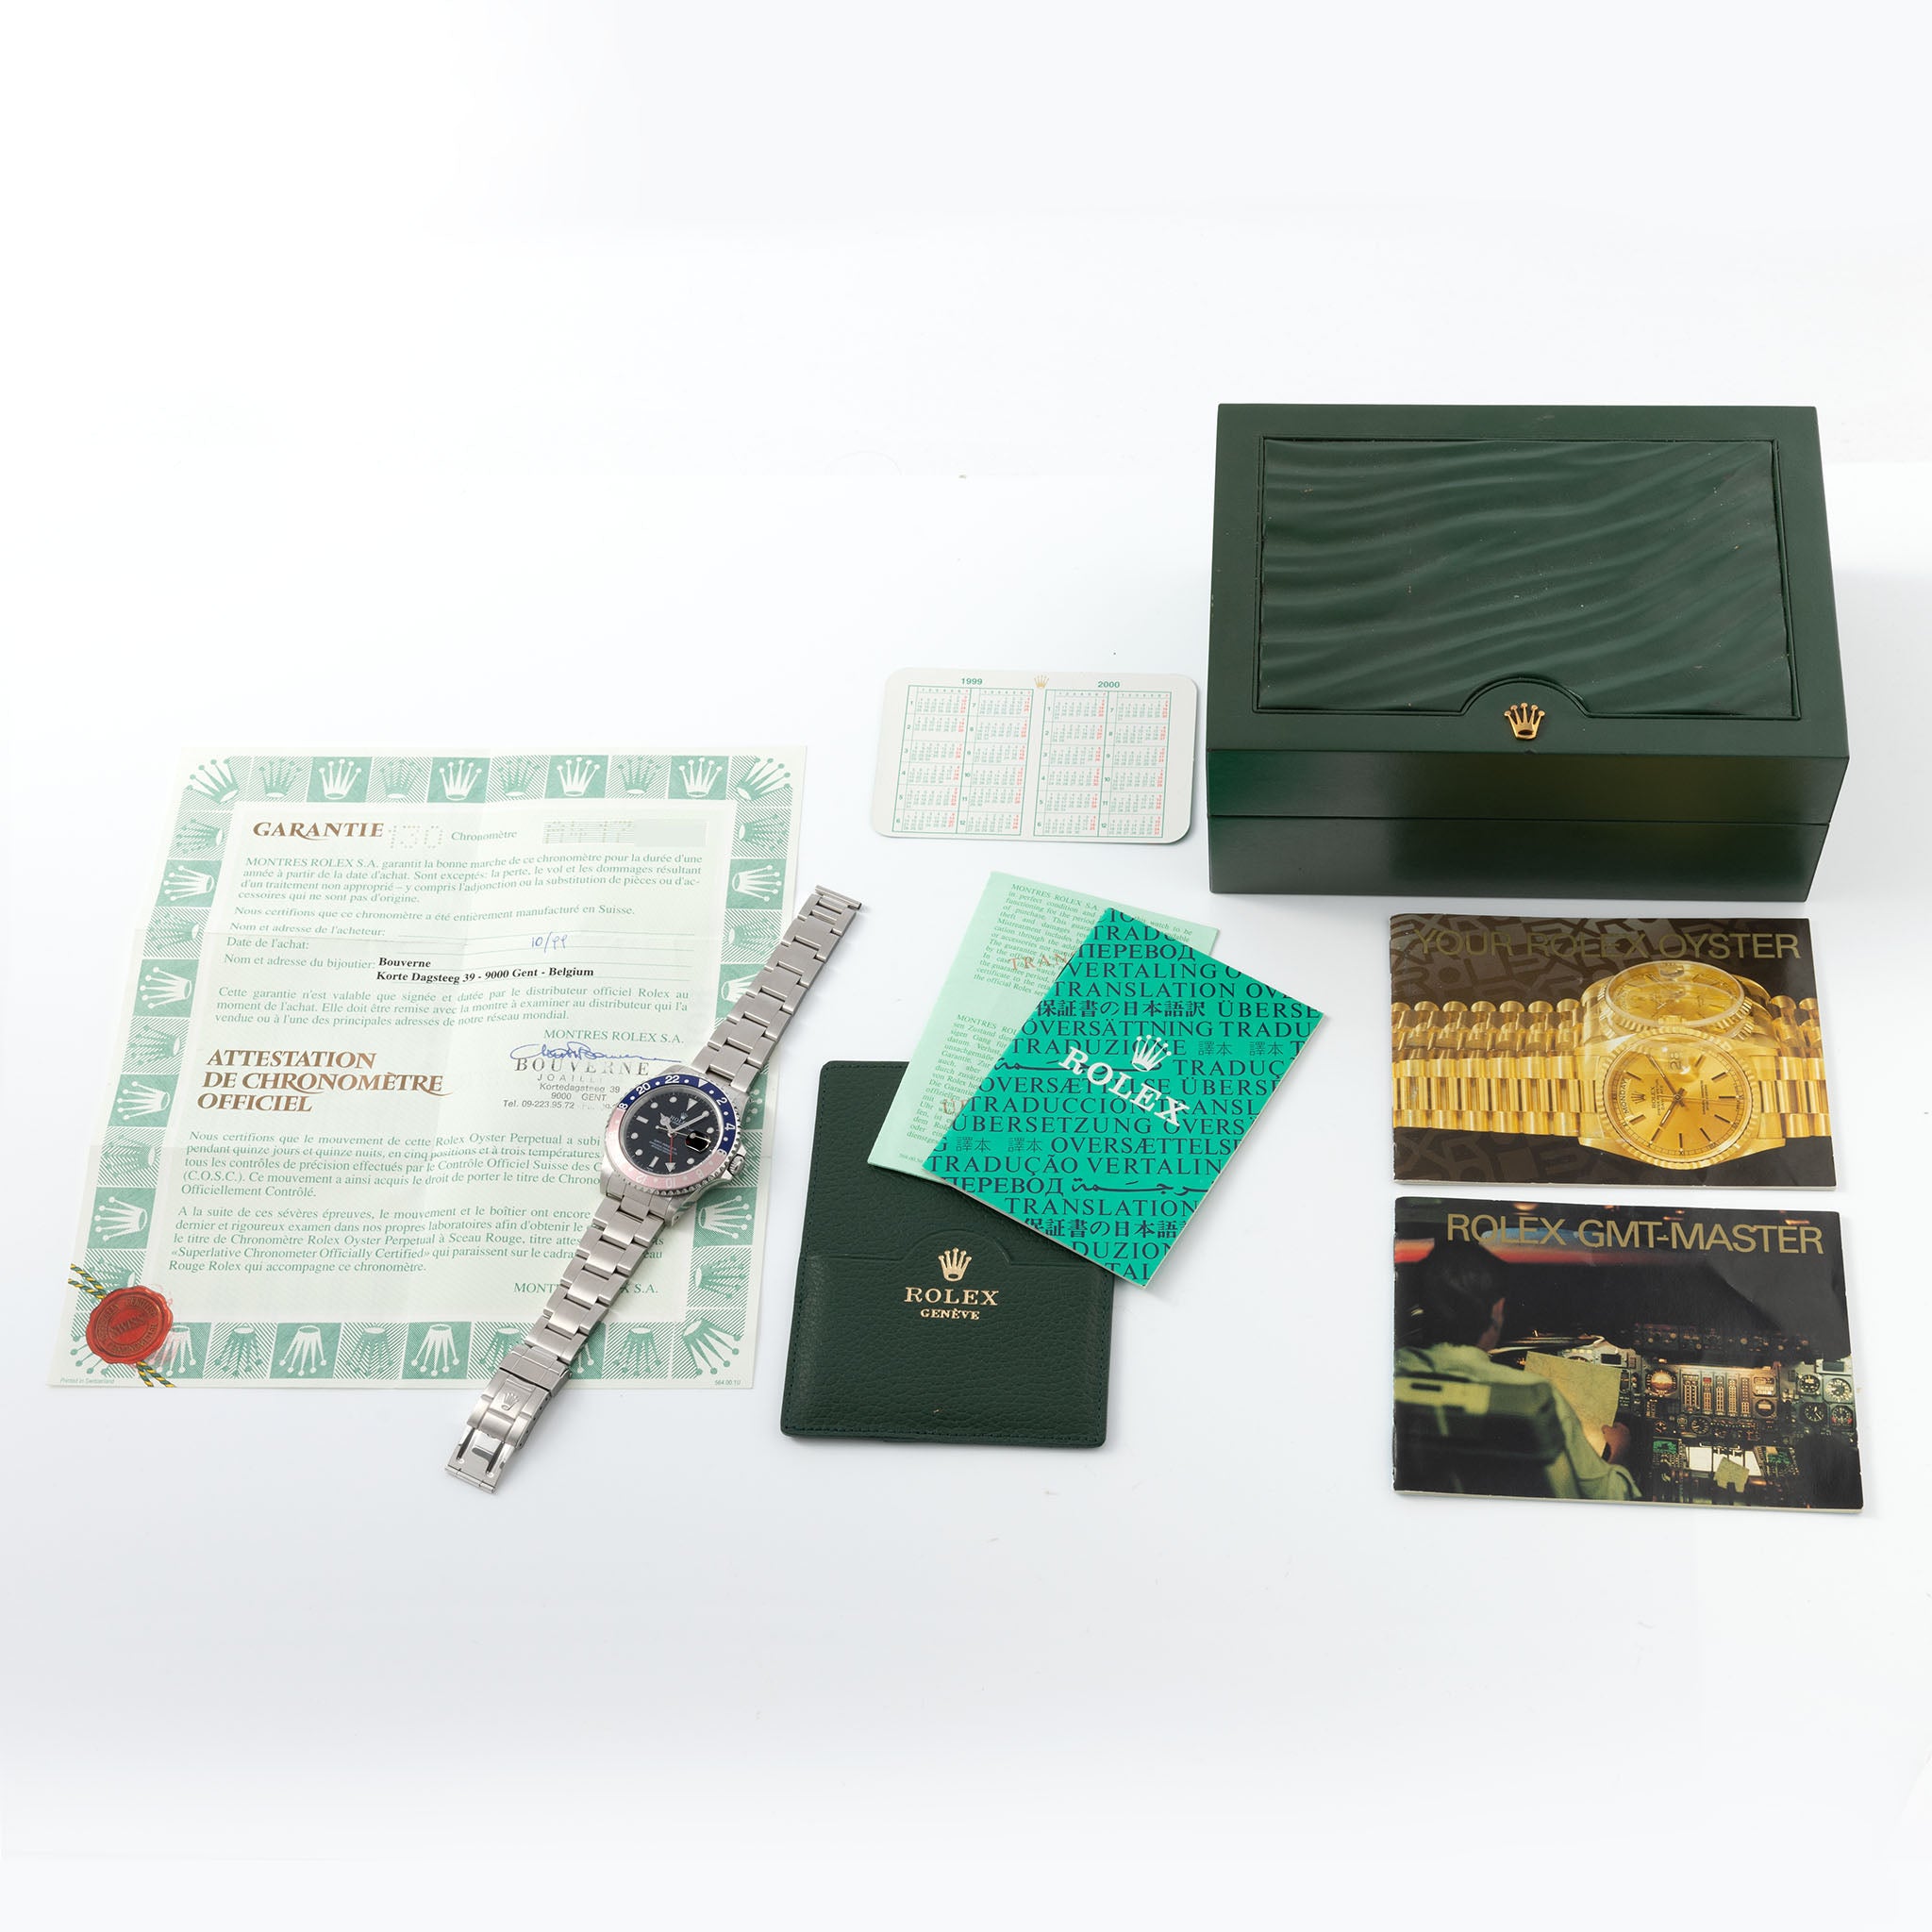 Rolex Gmt-master Swiss only dial ref 16700 Box and papers set faded Pepsi